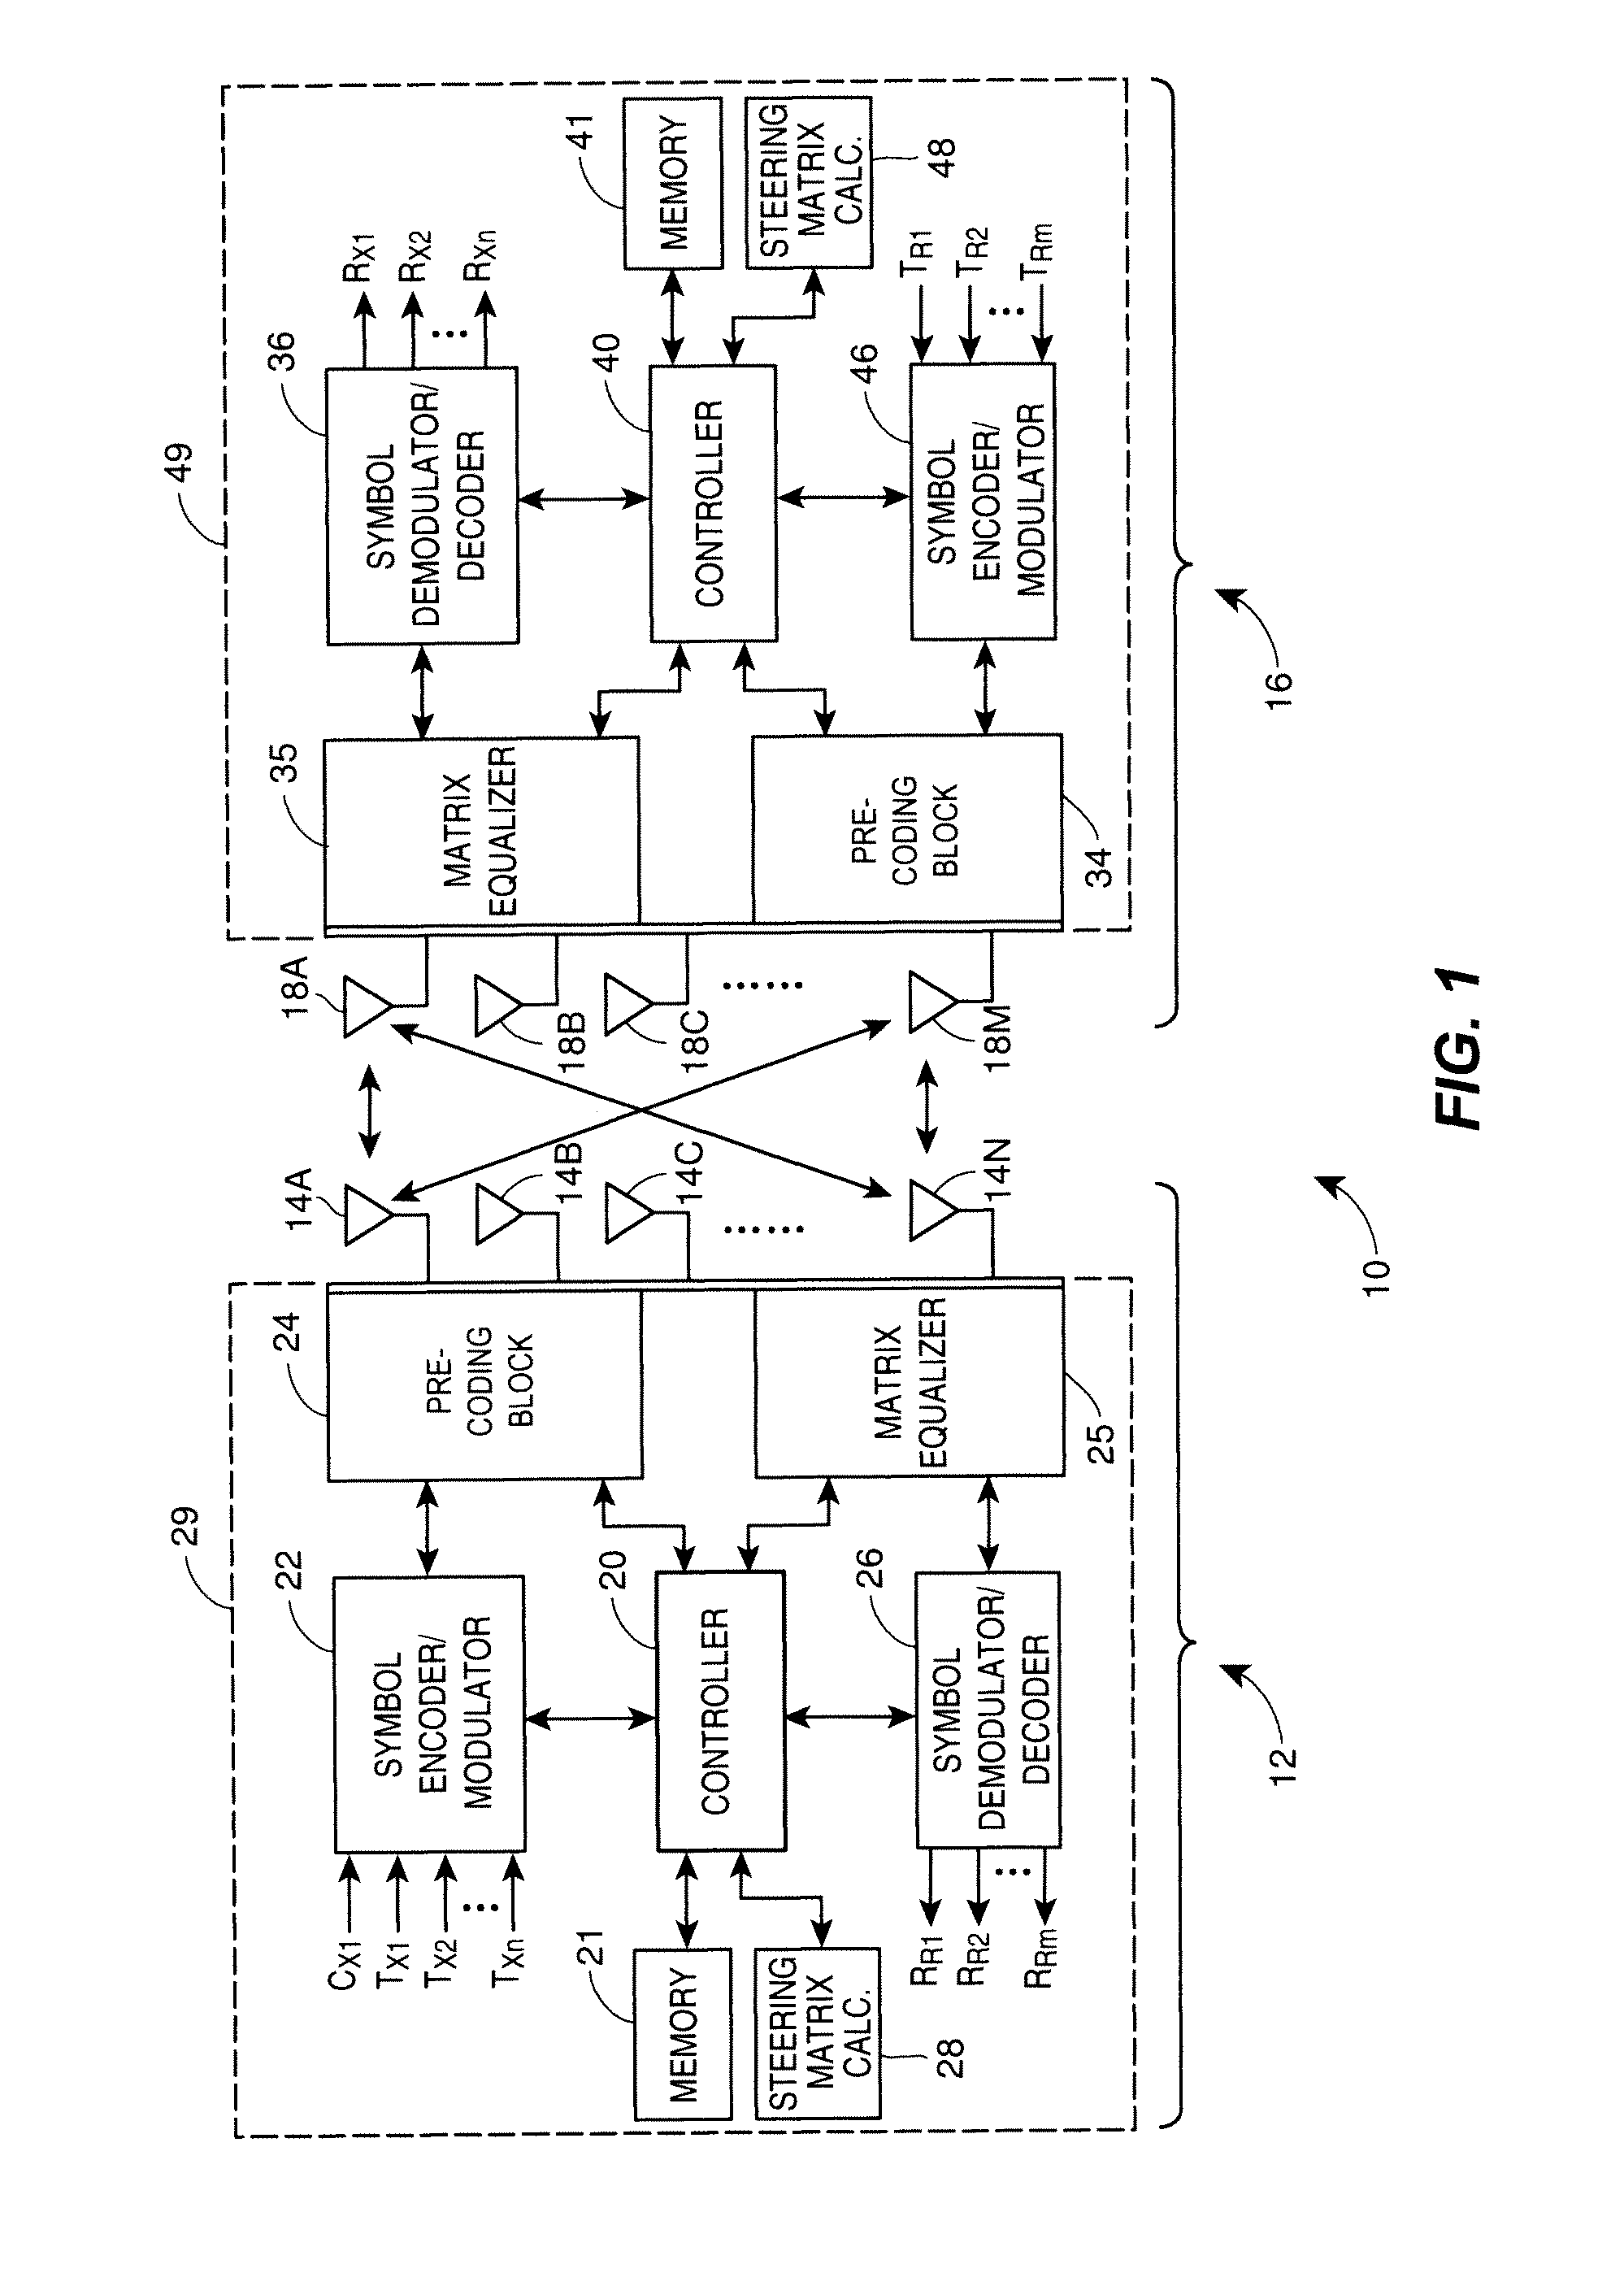 Transmit beamforming utilizing codebook selection in a wireless MIMO communication system